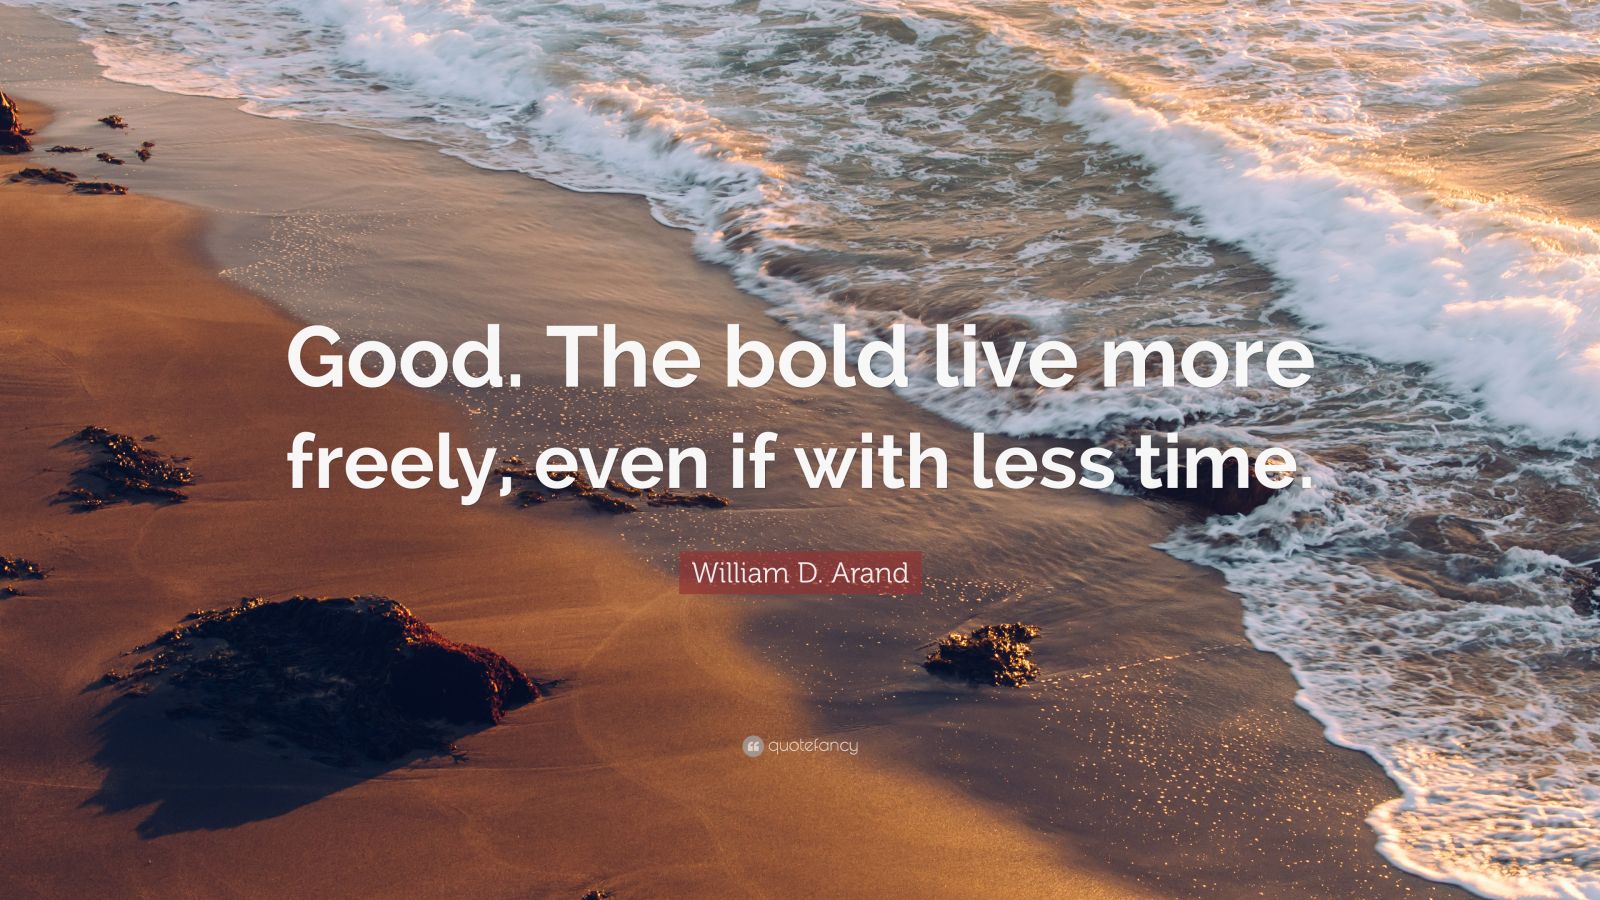 William D. Arand Quote “Good. The bold live more freely, even if with